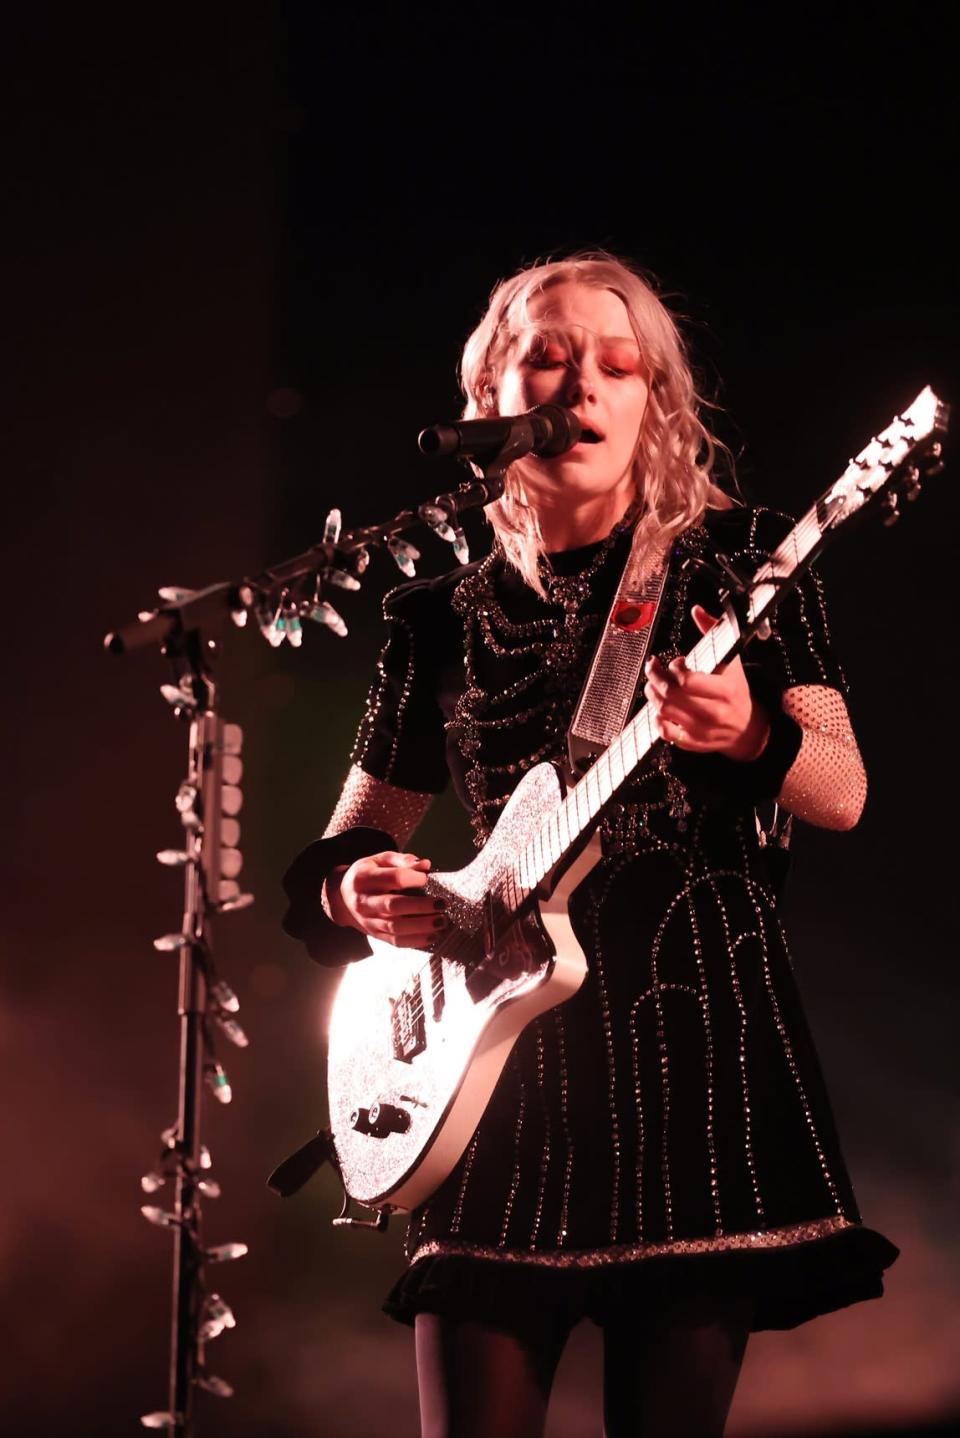 Phoebe Bridgers in Gucci at the 2022 Coachella Valley Music and Arts Festival. - Credit: Courtesy of Gucci